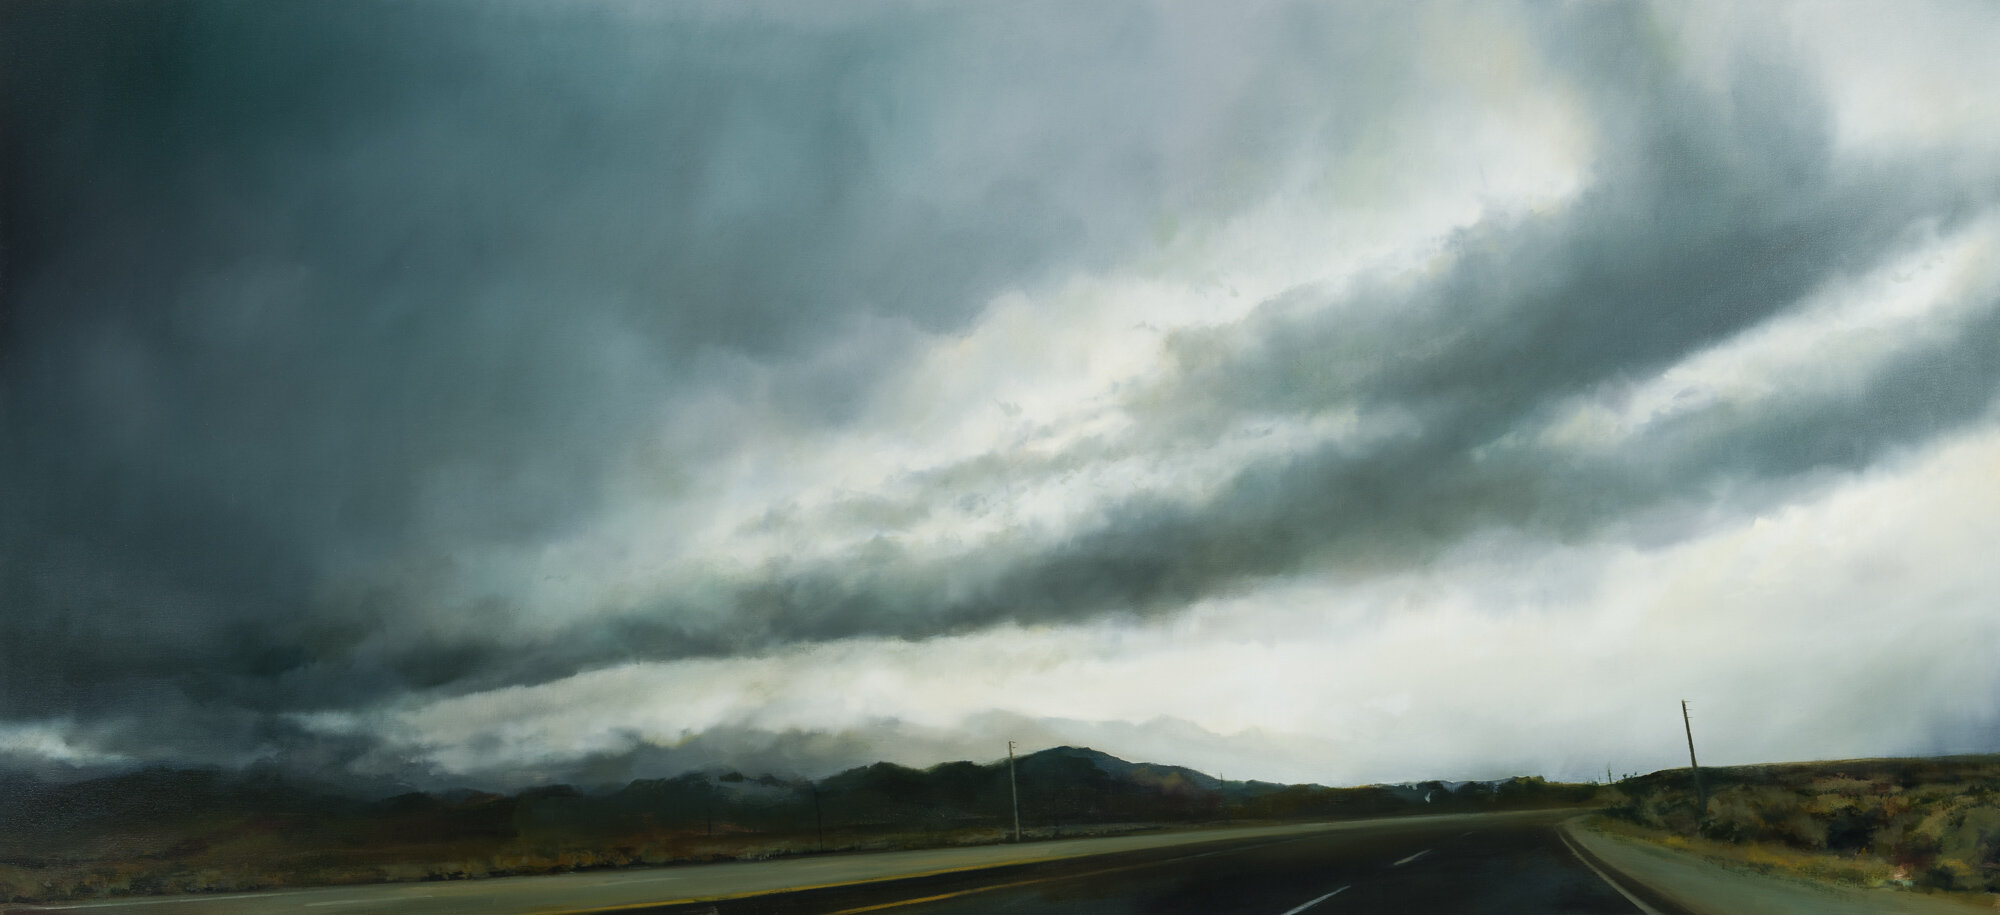   eastern storm •   33" x 72"  oil on canvas  2019     